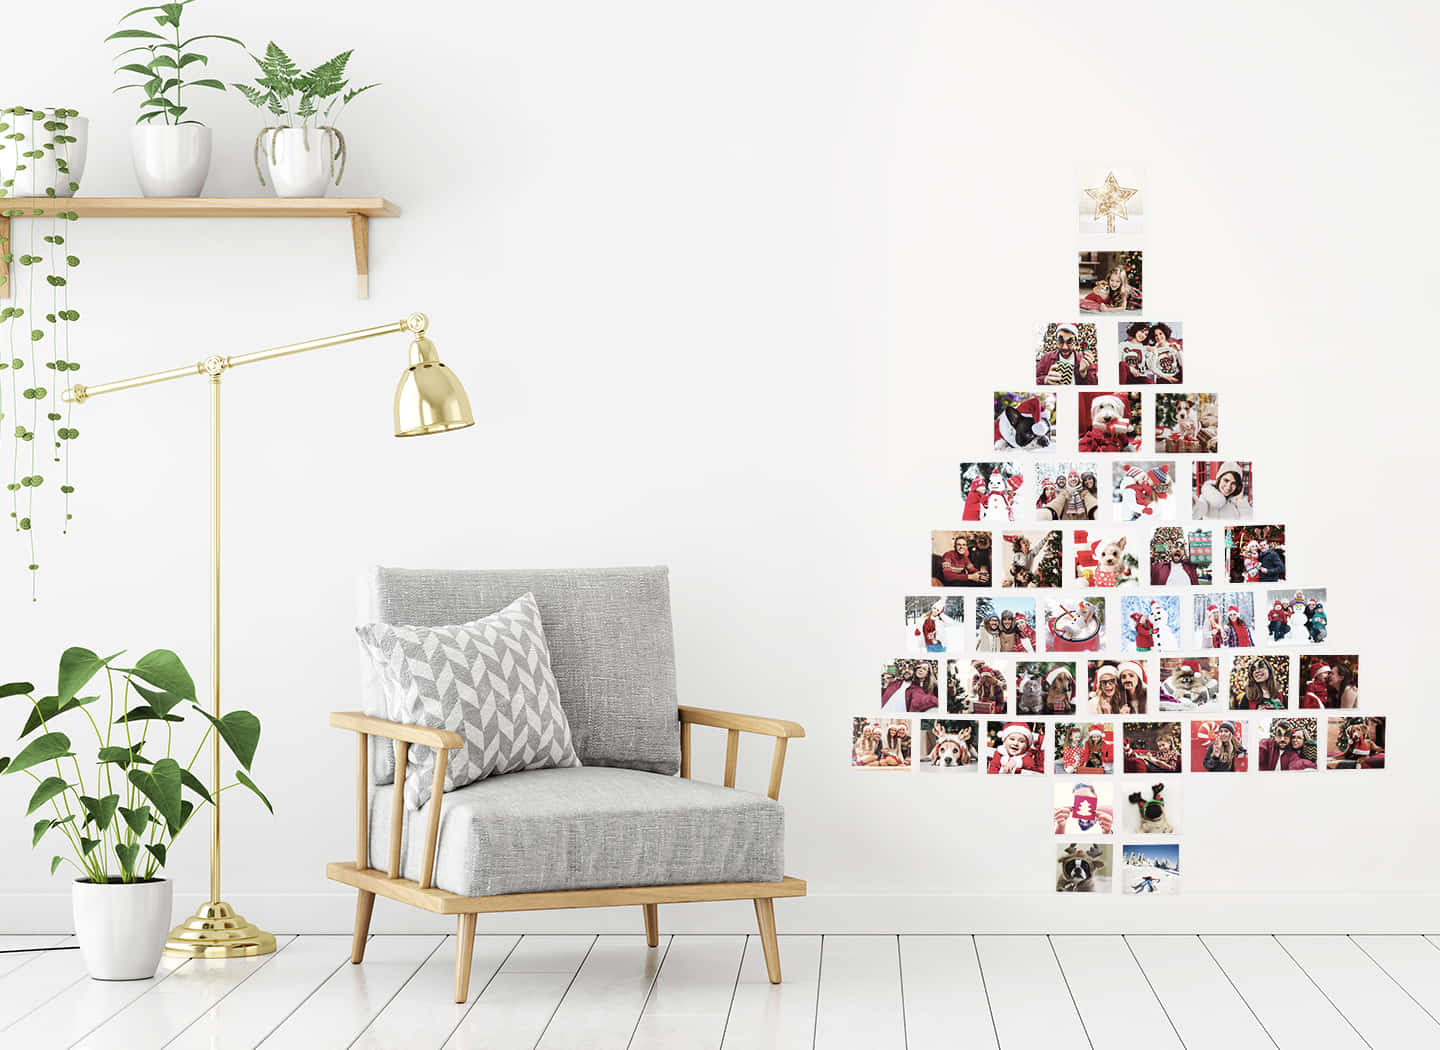 Create a vibrant wall collage with colorful photos and designs!